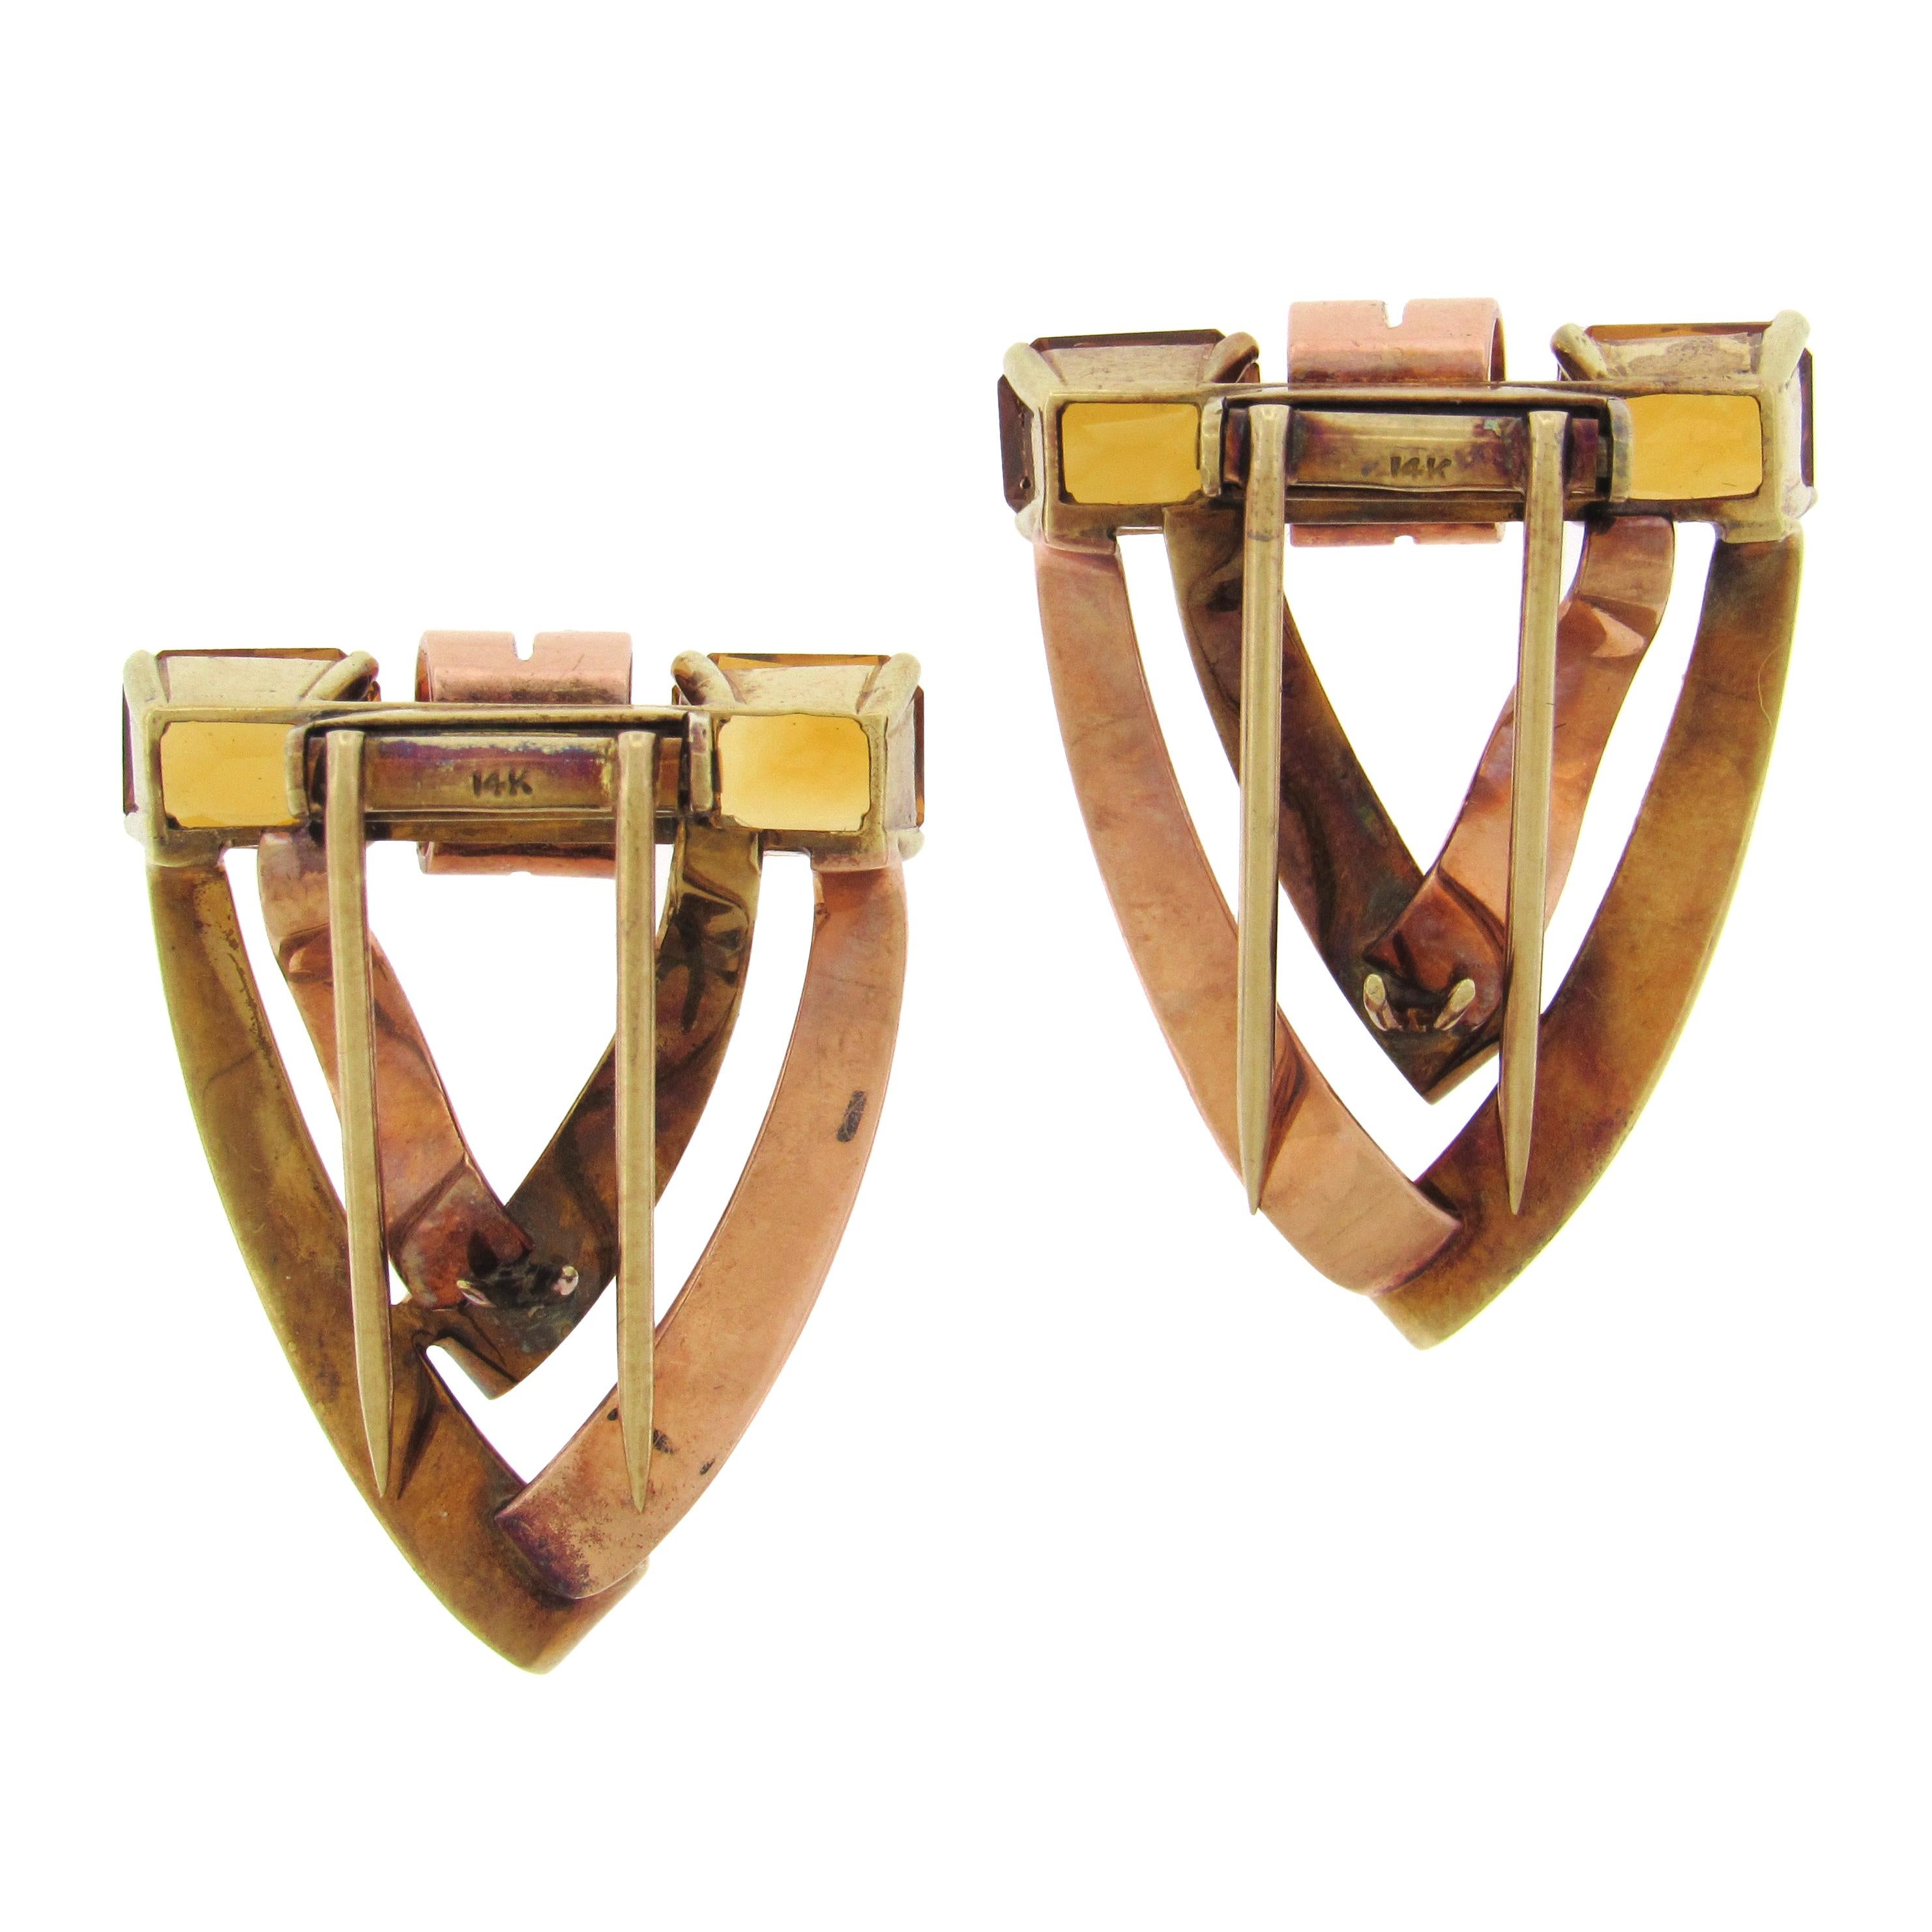 Vintage dress clips, circa 1940’s, by Tiffany & Co, in ribbon curl chevrons of 14K rose and yellow gold, set at top with radiant emerald-cut citrines, approx. 4 carats tw. The dress clips measure 1″ x 1-1/4″ x 1/2″. 